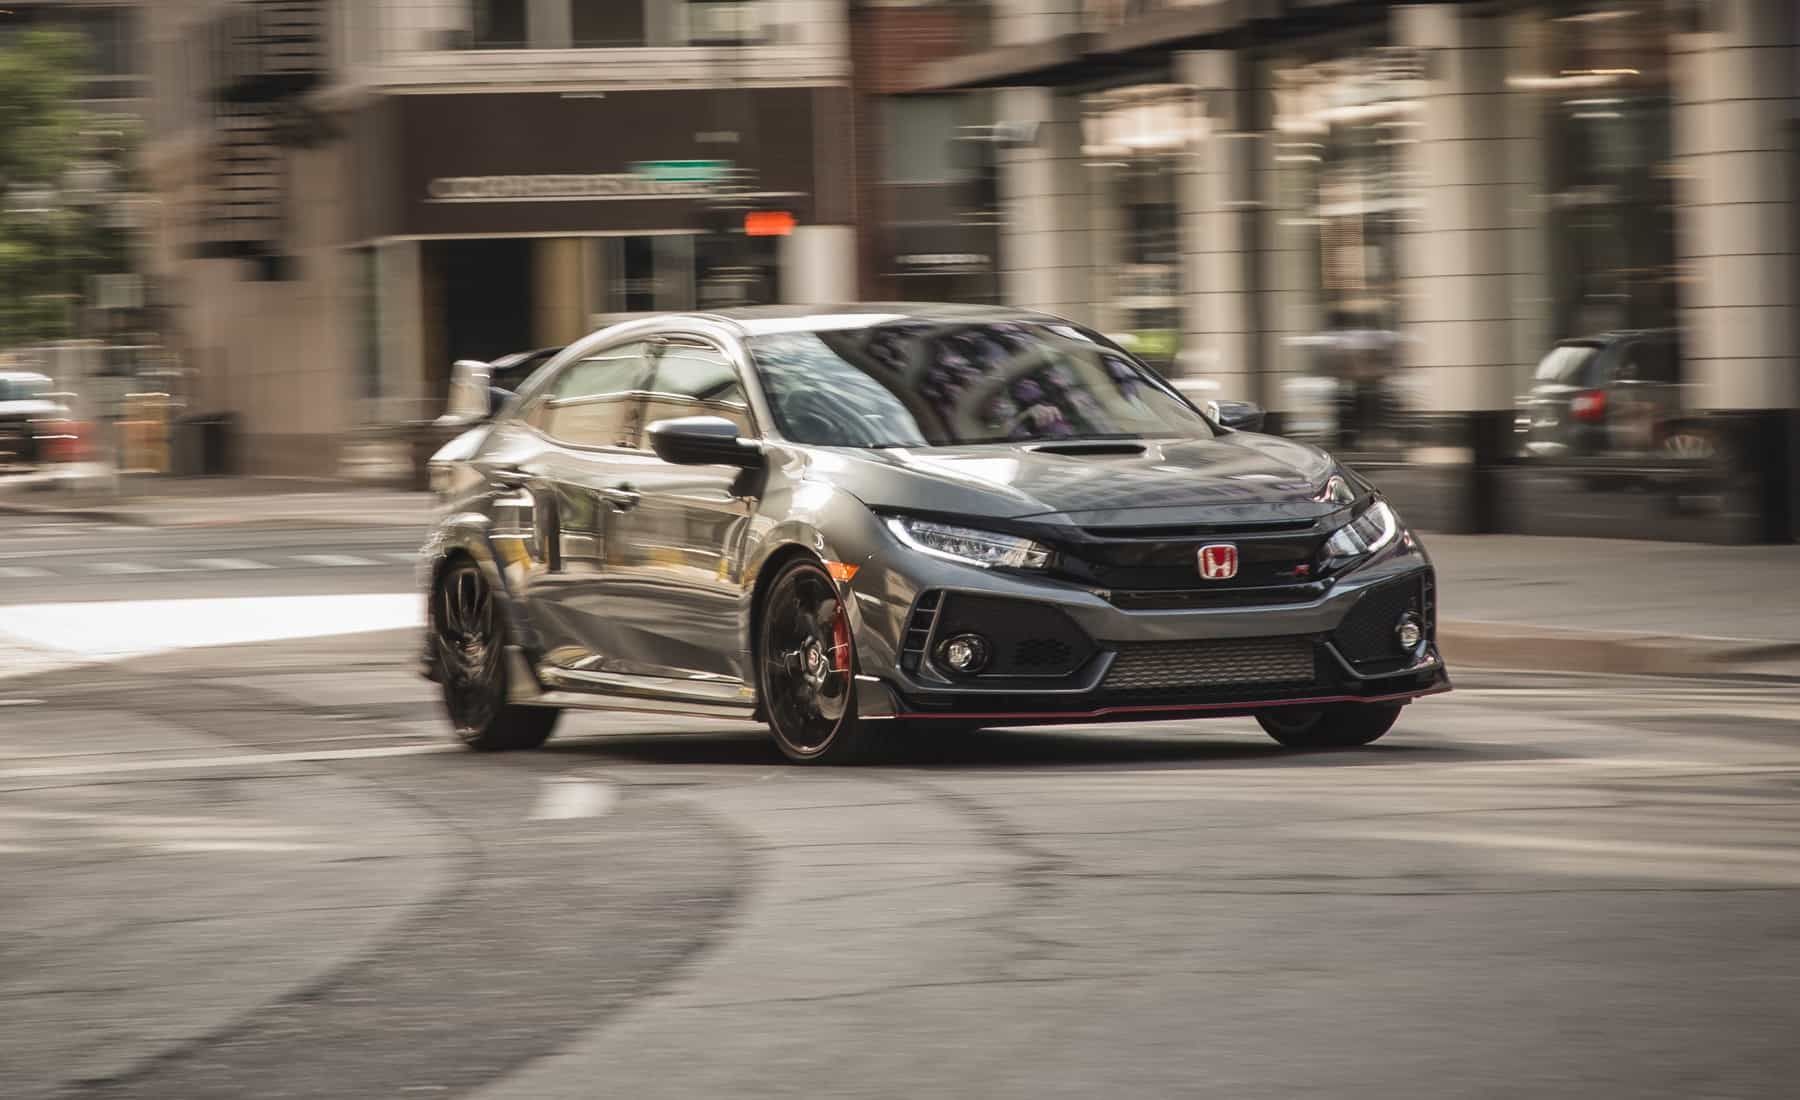 2017 Honda Civic Type R Test Drive Side And Front View (View 9 of 48)